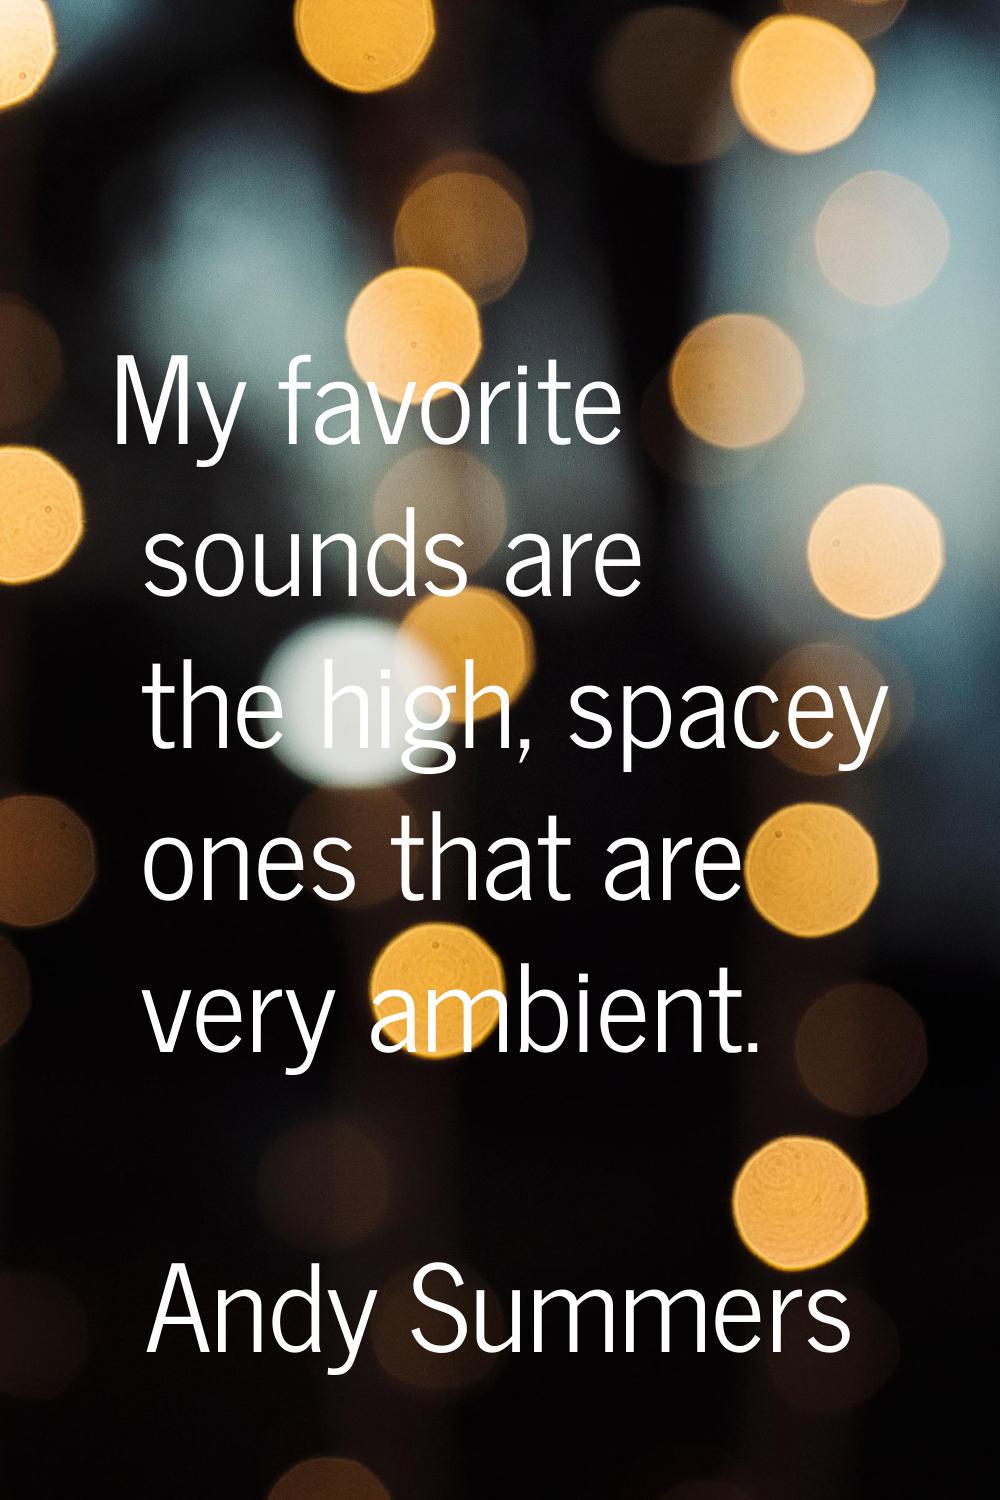 My favorite sounds are the high, spacey ones that are very ambient.